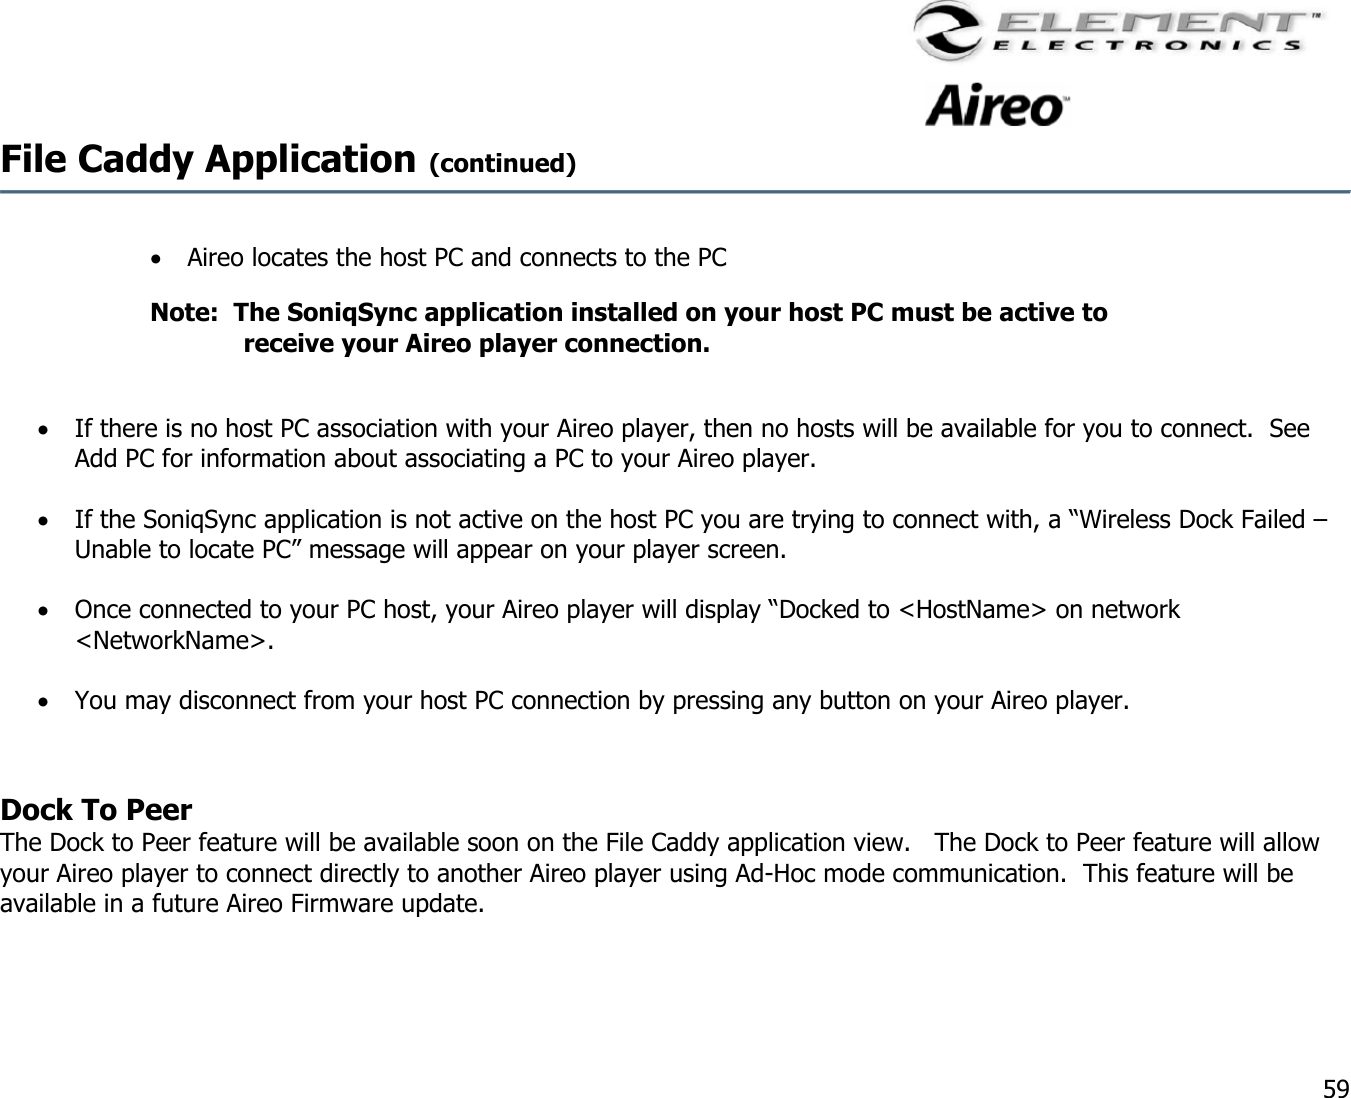                                                                                    59 File Caddy Application (continued)     •  Aireo locates the host PC and connects to the PC Note:  The SoniqSync application installed on your host PC must be active to receive your Aireo player connection.  •  If there is no host PC association with your Aireo player, then no hosts will be available for you to connect.  See Add PC for information about associating a PC to your Aireo player.  •  If the SoniqSync application is not active on the host PC you are trying to connect with, a “Wireless Dock Failed – Unable to locate PC” message will appear on your player screen.  •  Once connected to your PC host, your Aireo player will display “Docked to &lt;HostName&gt; on network &lt;NetworkName&gt;.  •  You may disconnect from your host PC connection by pressing any button on your Aireo player.     Dock To Peer The Dock to Peer feature will be available soon on the File Caddy application view.   The Dock to Peer feature will allow your Aireo player to connect directly to another Aireo player using Ad-Hoc mode communication.  This feature will be available in a future Aireo Firmware update.  